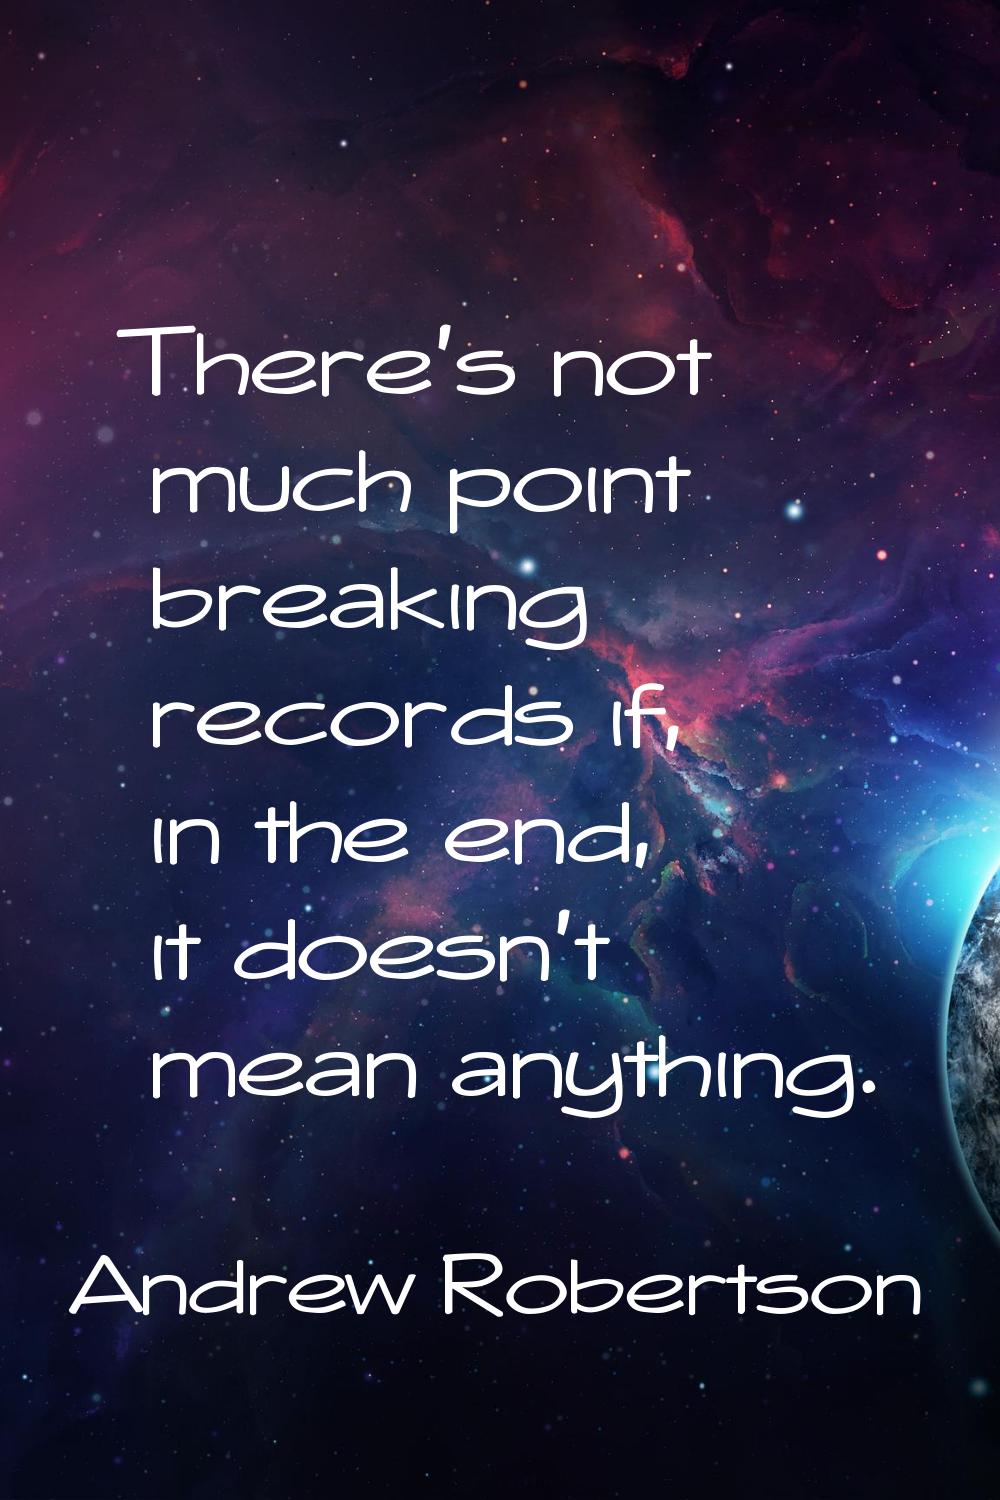 There's not much point breaking records if, in the end, it doesn't mean anything.